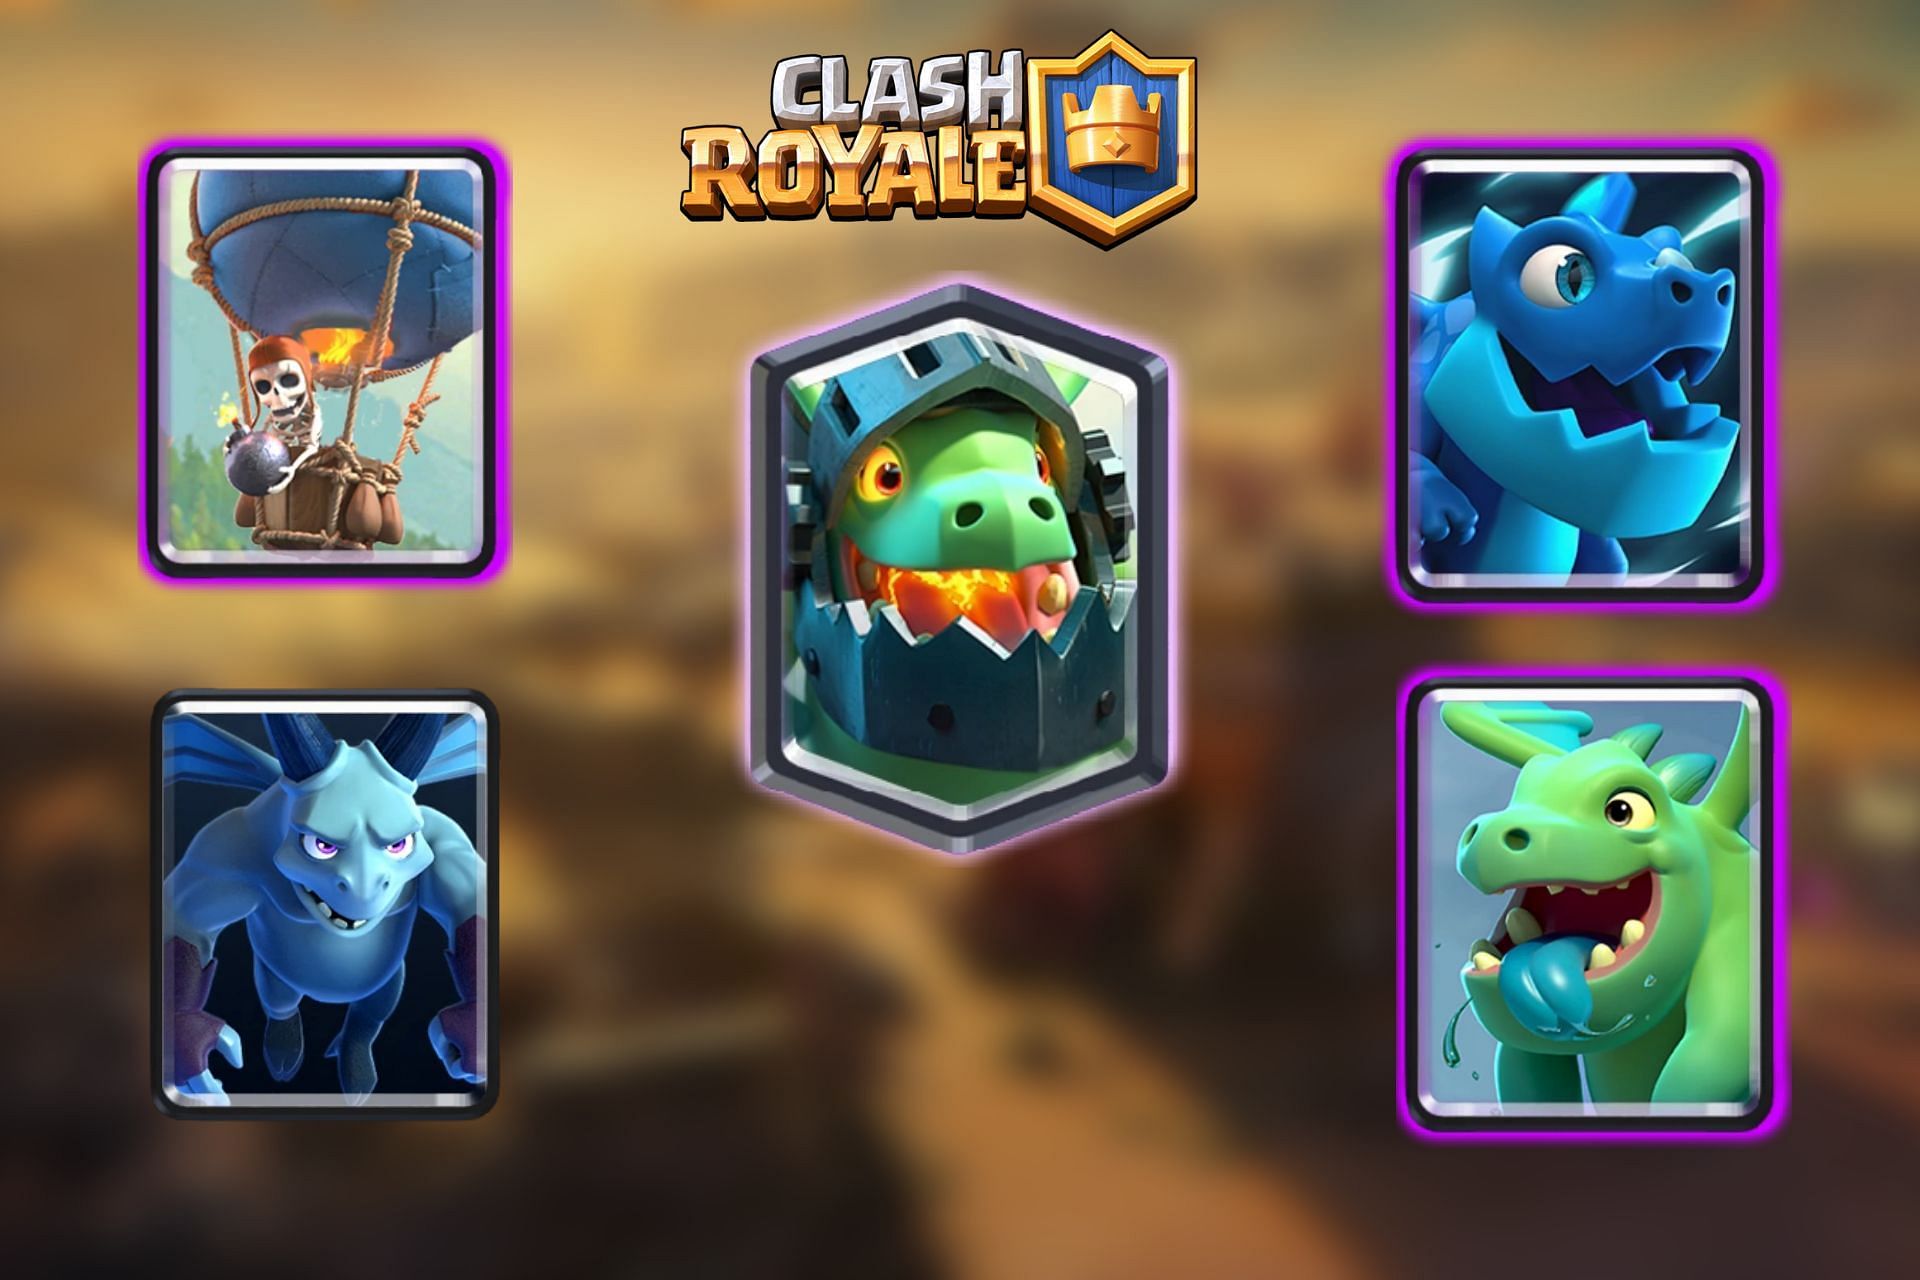 Air troops for Super Witch Crown Challenge in Clash Royale (Image via Sportskeeda)